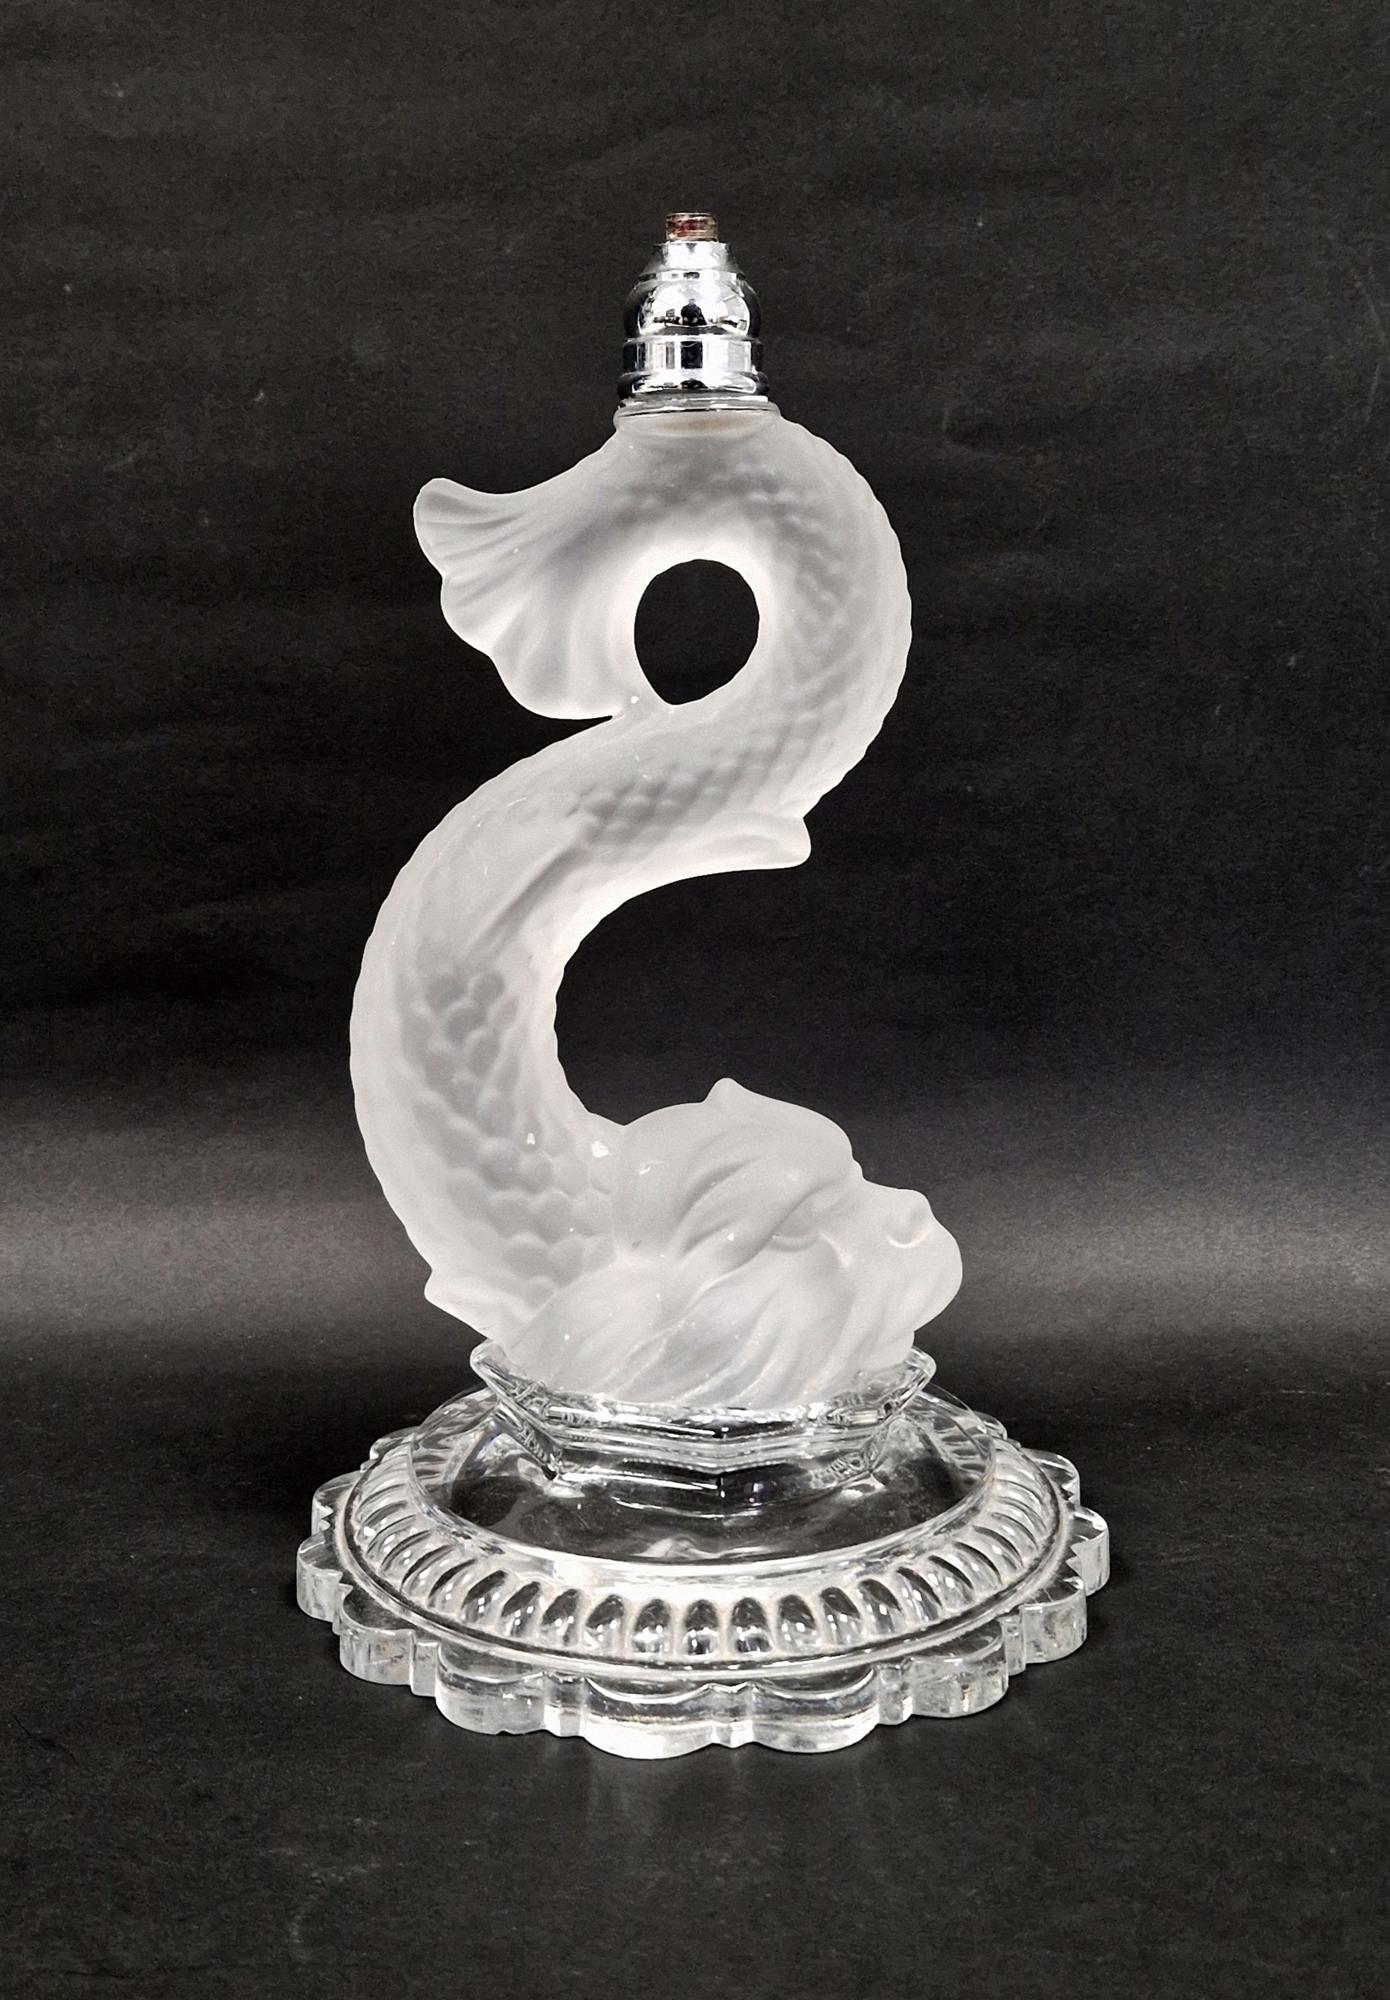 Baccarat frosted glass dolphin-shaped stand with white metal fitting for a shade, on domed petal